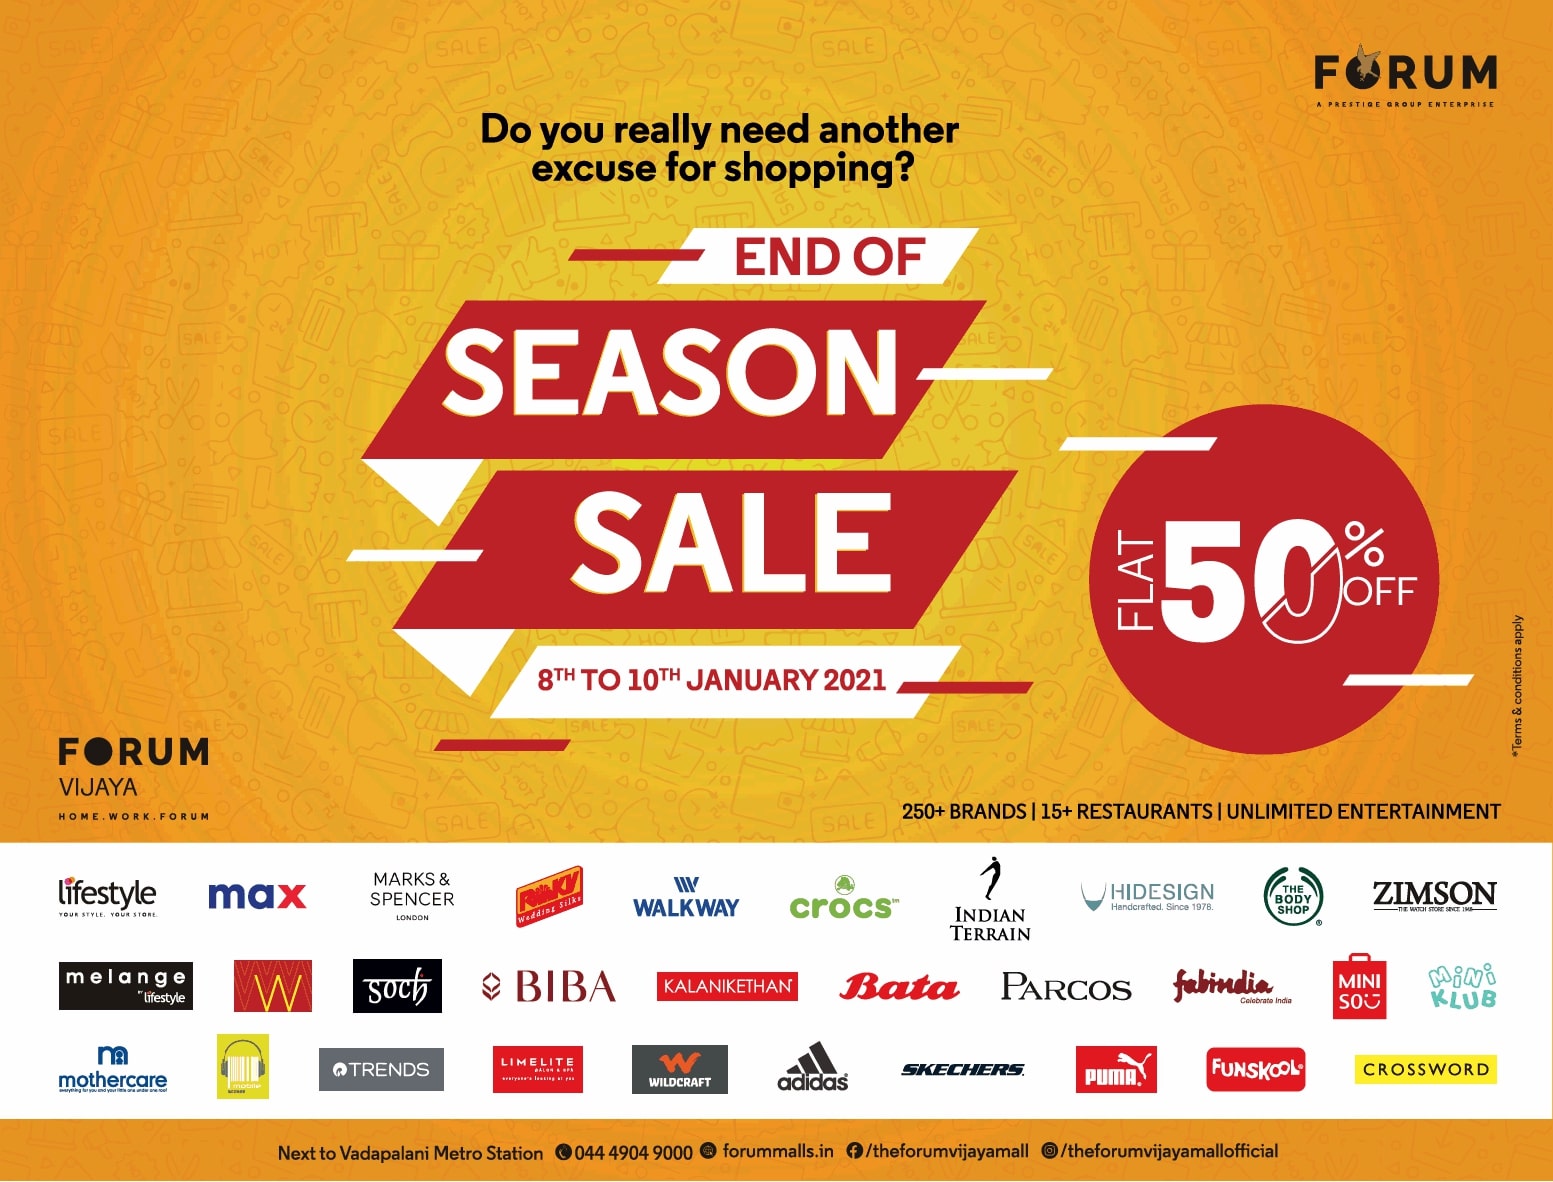 forum-do-you-really-need-another-excuse-for-shopping-end-of-season-sale-ad-chennai-times-08-01-2021